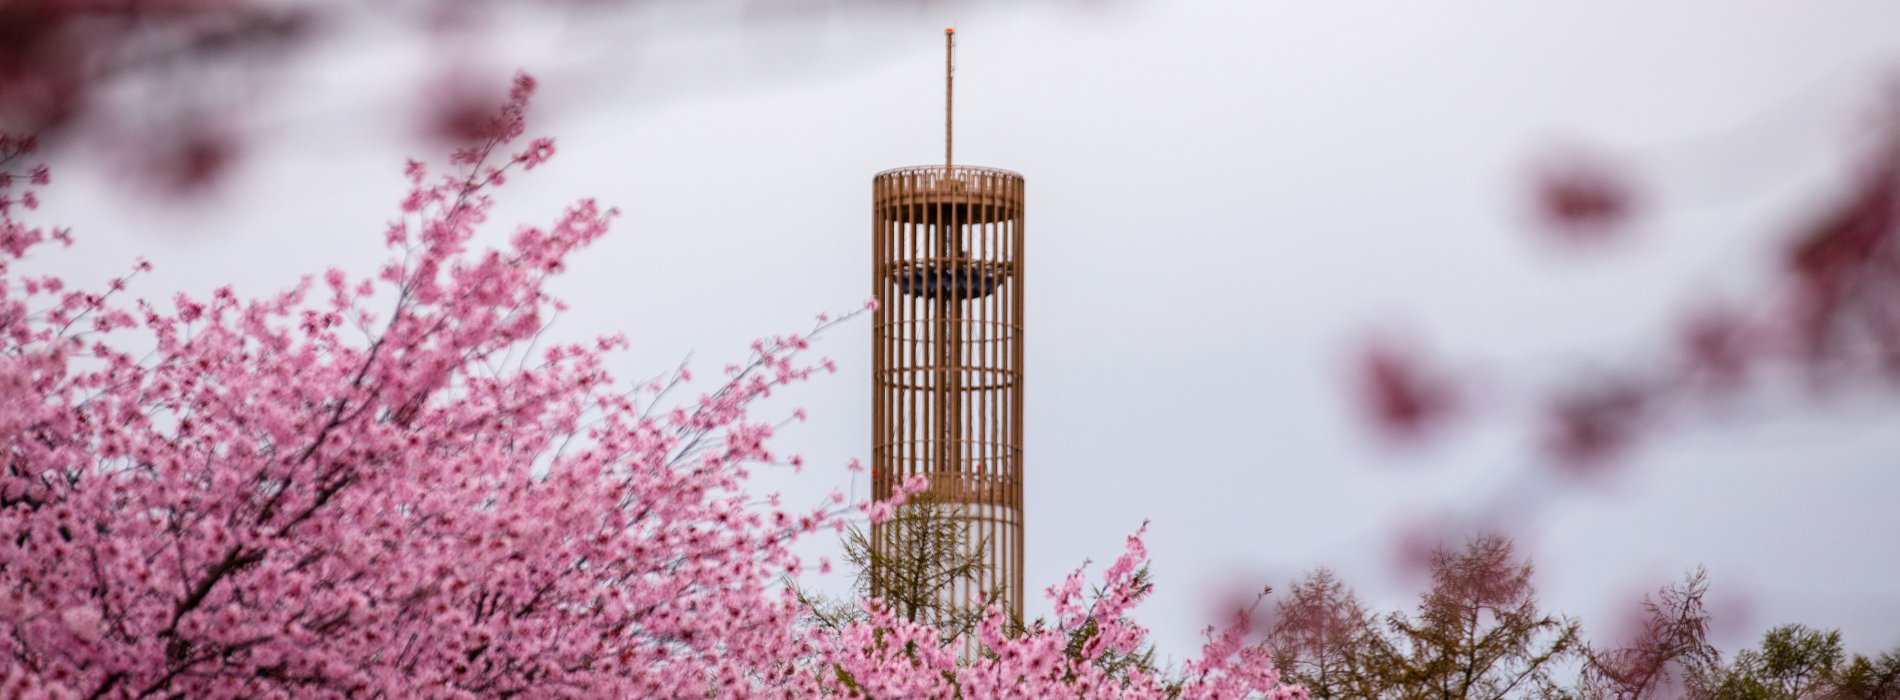 The carillon stands in the background, with pink flowering trees in the foreground.